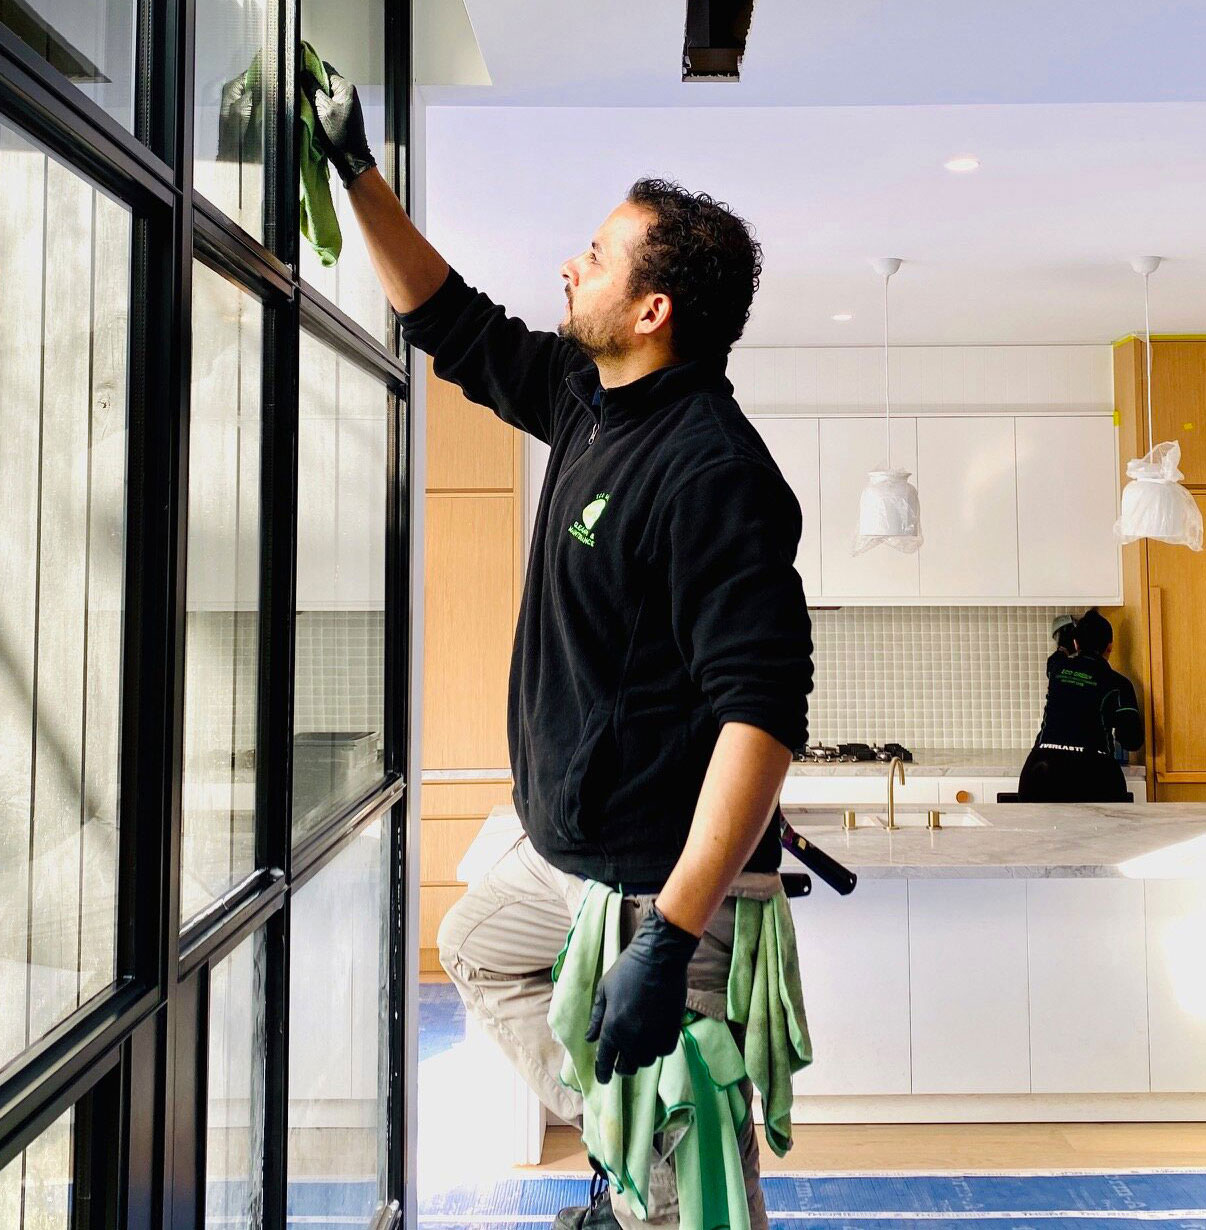 QUALITY CLEANING SERVICE IN BRISBANE